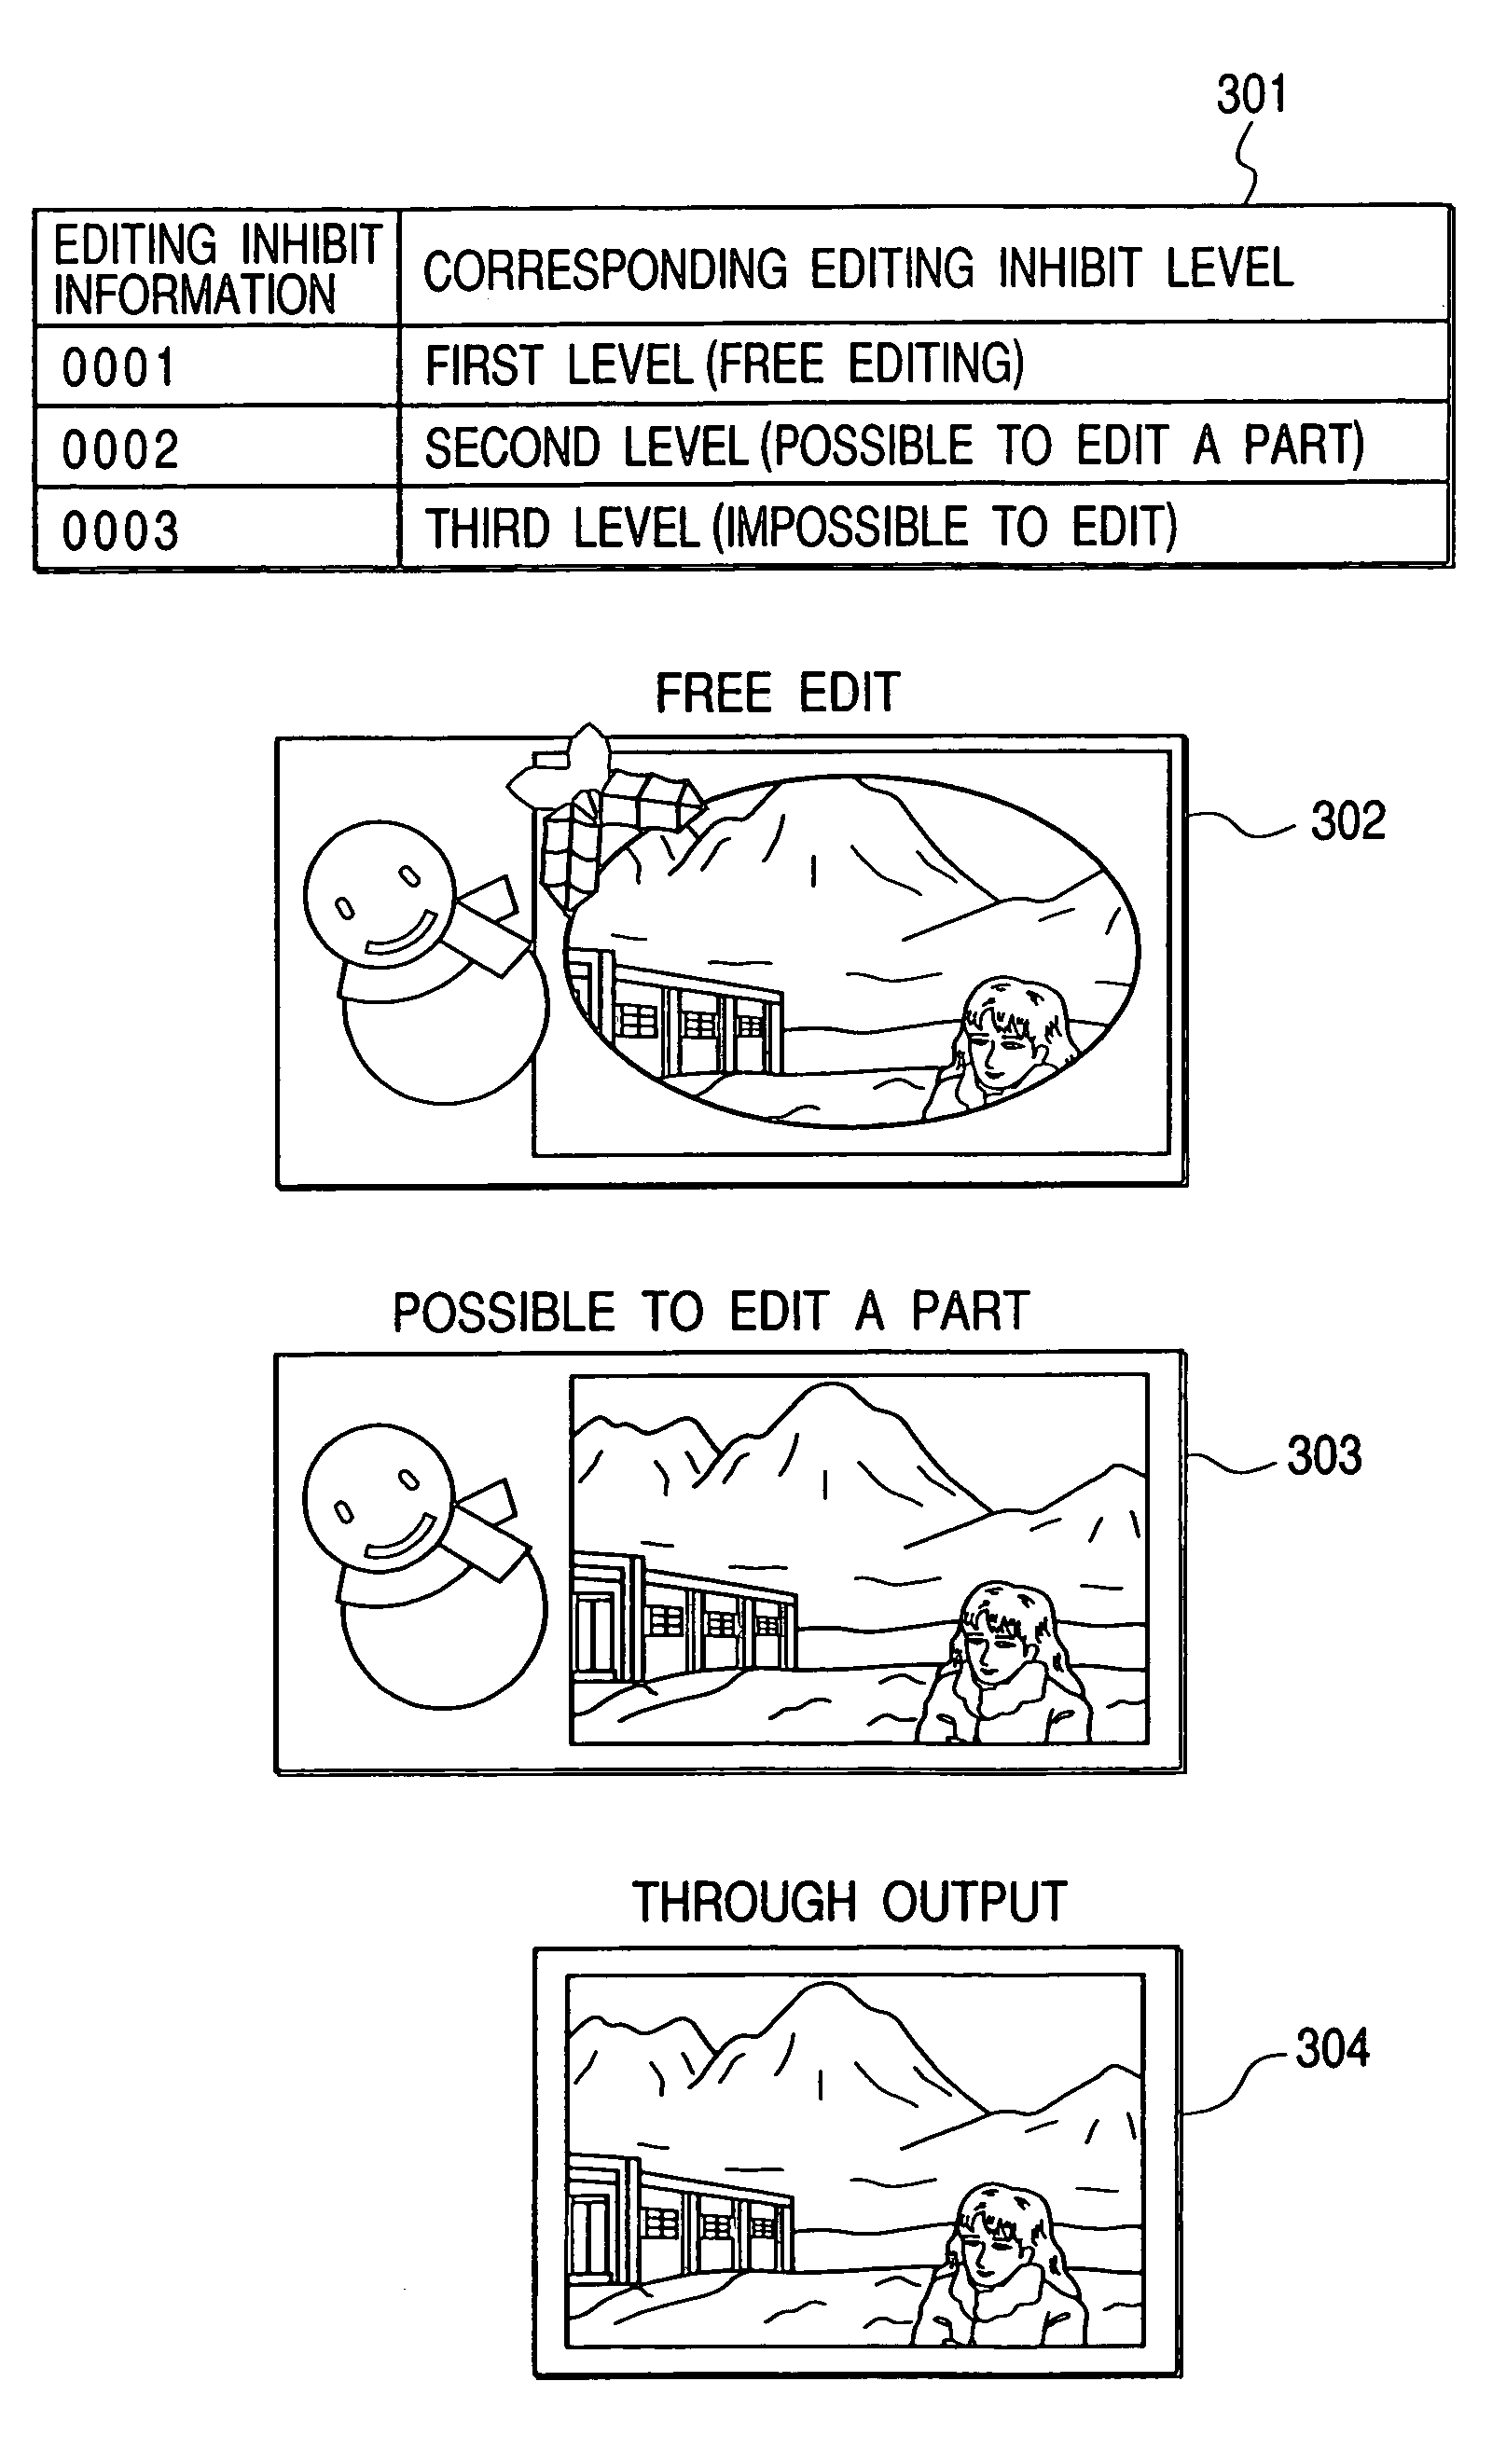 Display and control of permitted data processing based on control information extracted from the data